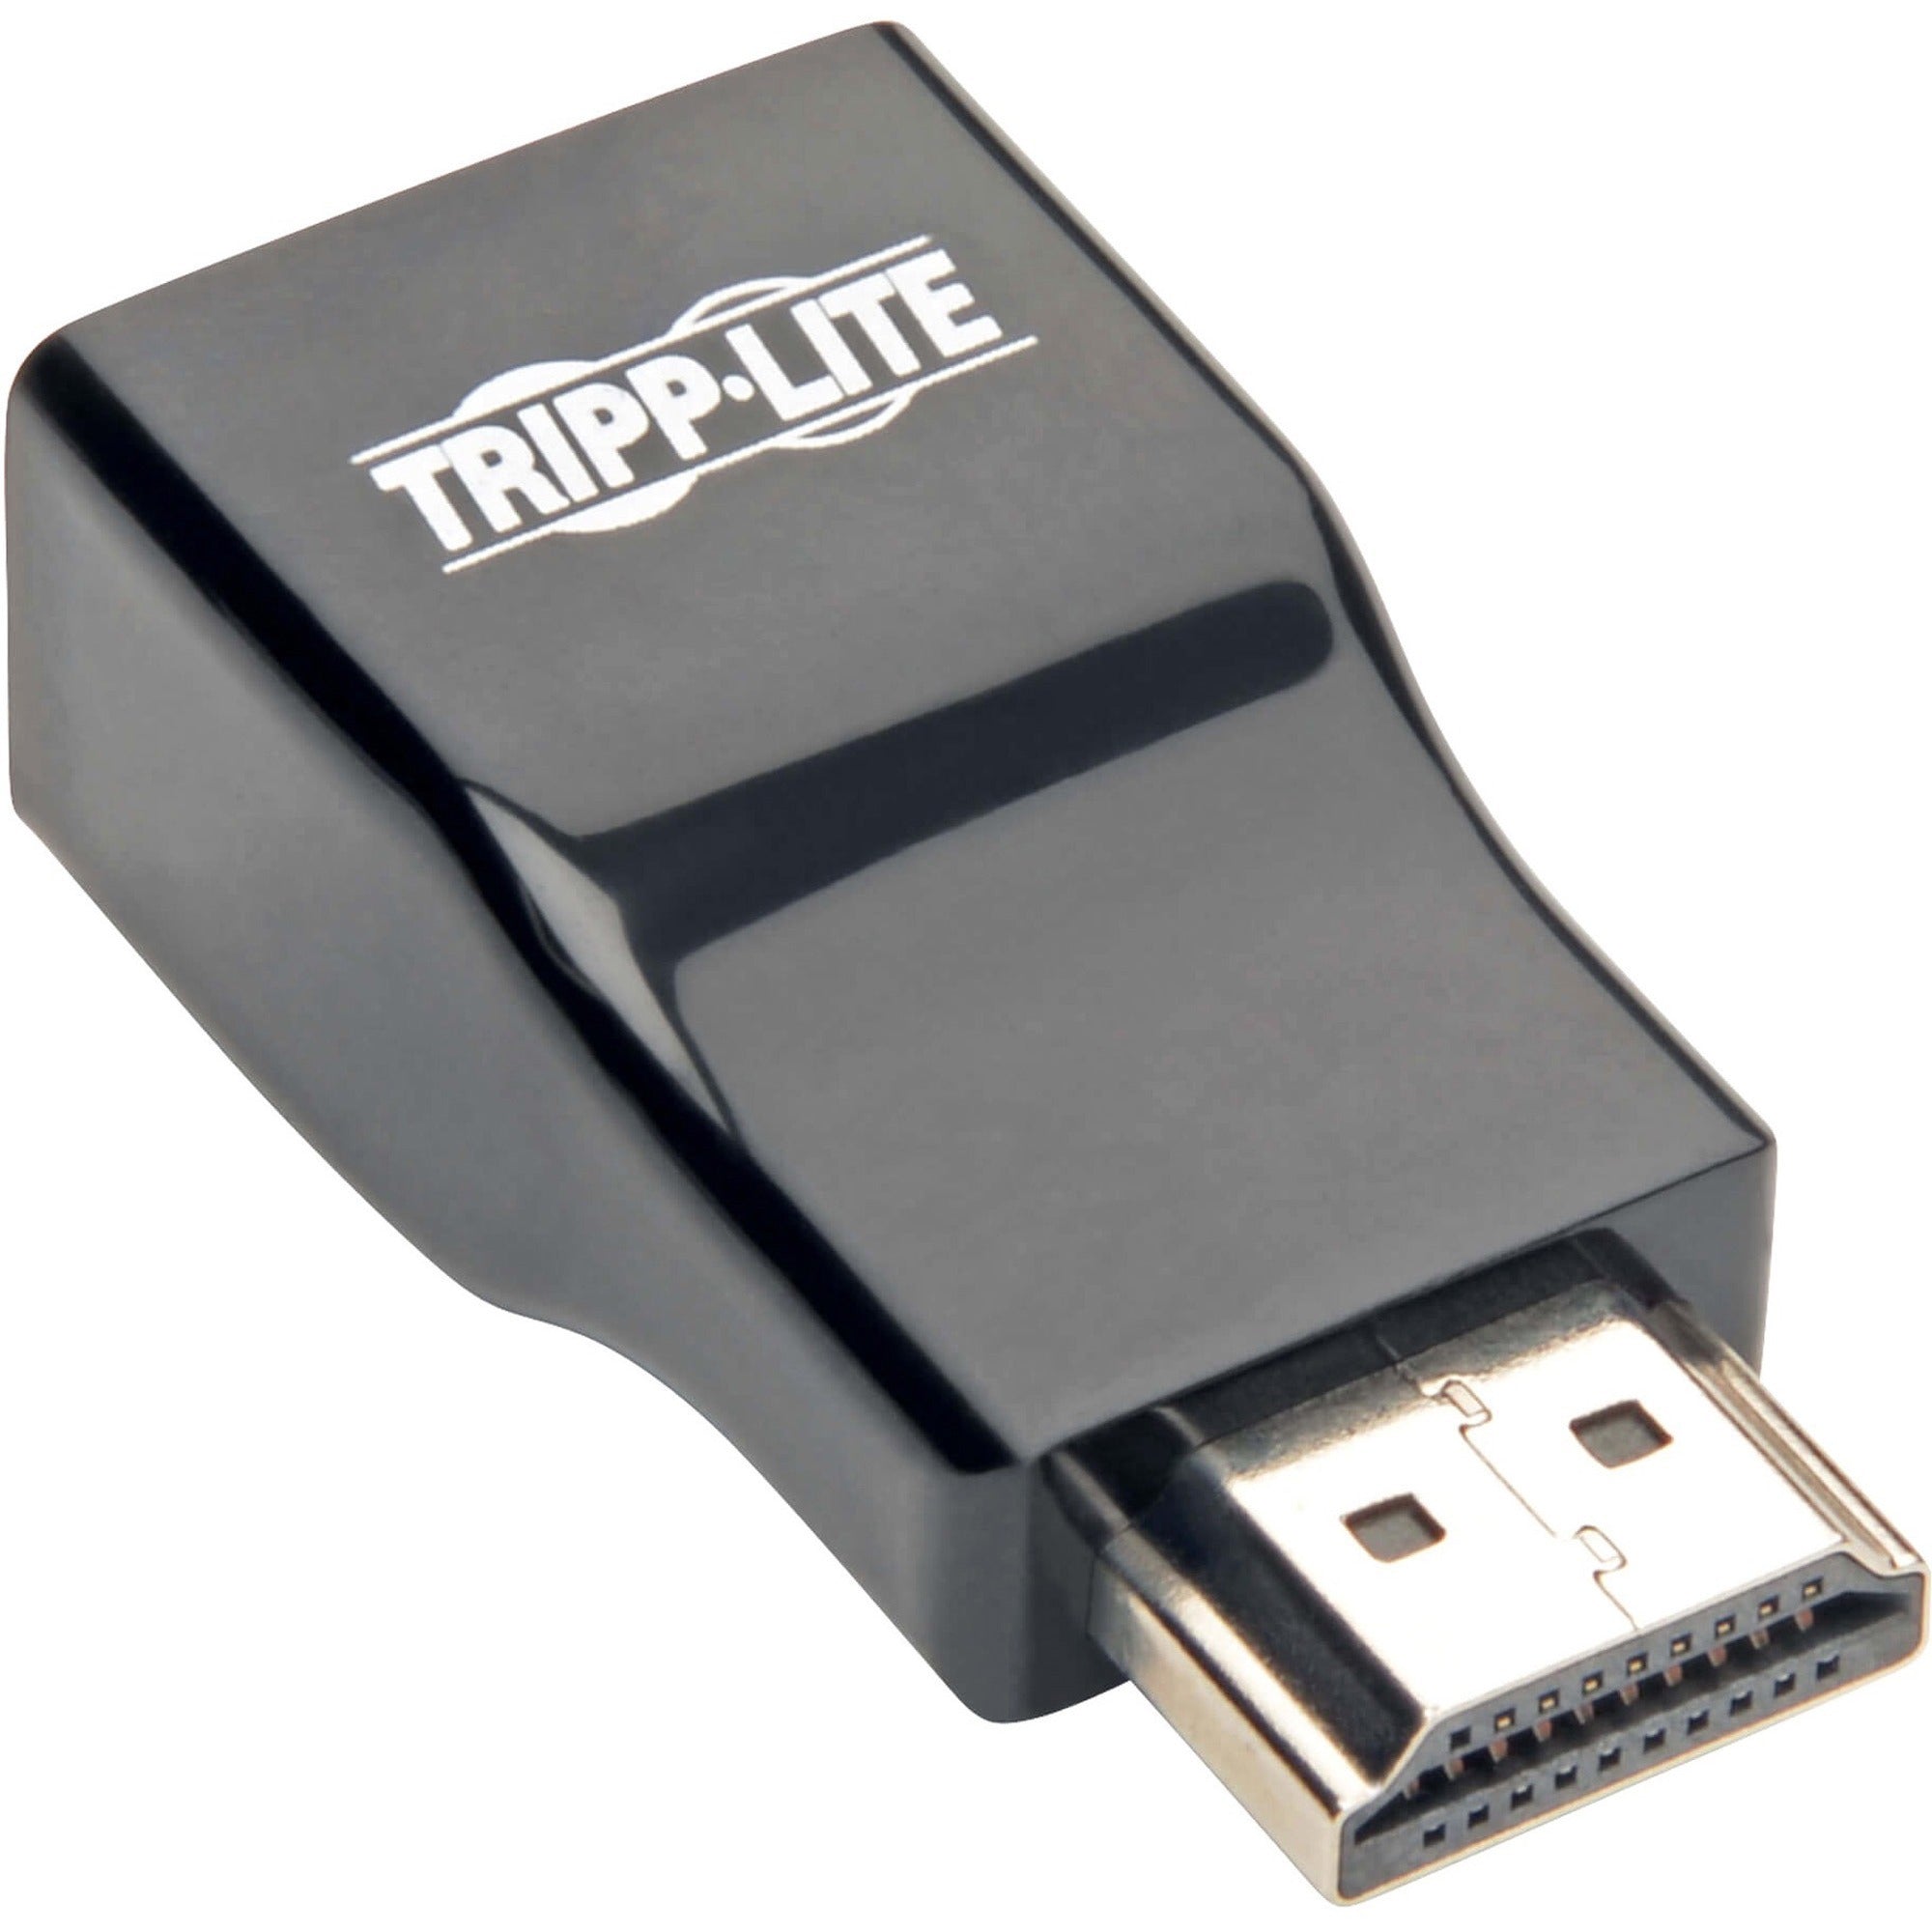 tripp-lite-by-eaton-hdmi-male-to-vga-female-adapter-video-converter-1-pack-1-x-hdmi-type-a-digital-audio-video-male-1-x-15-pin-hd-15-vga-female-1920-x-1080-supported-taa-compliant_trpp131000 - 1